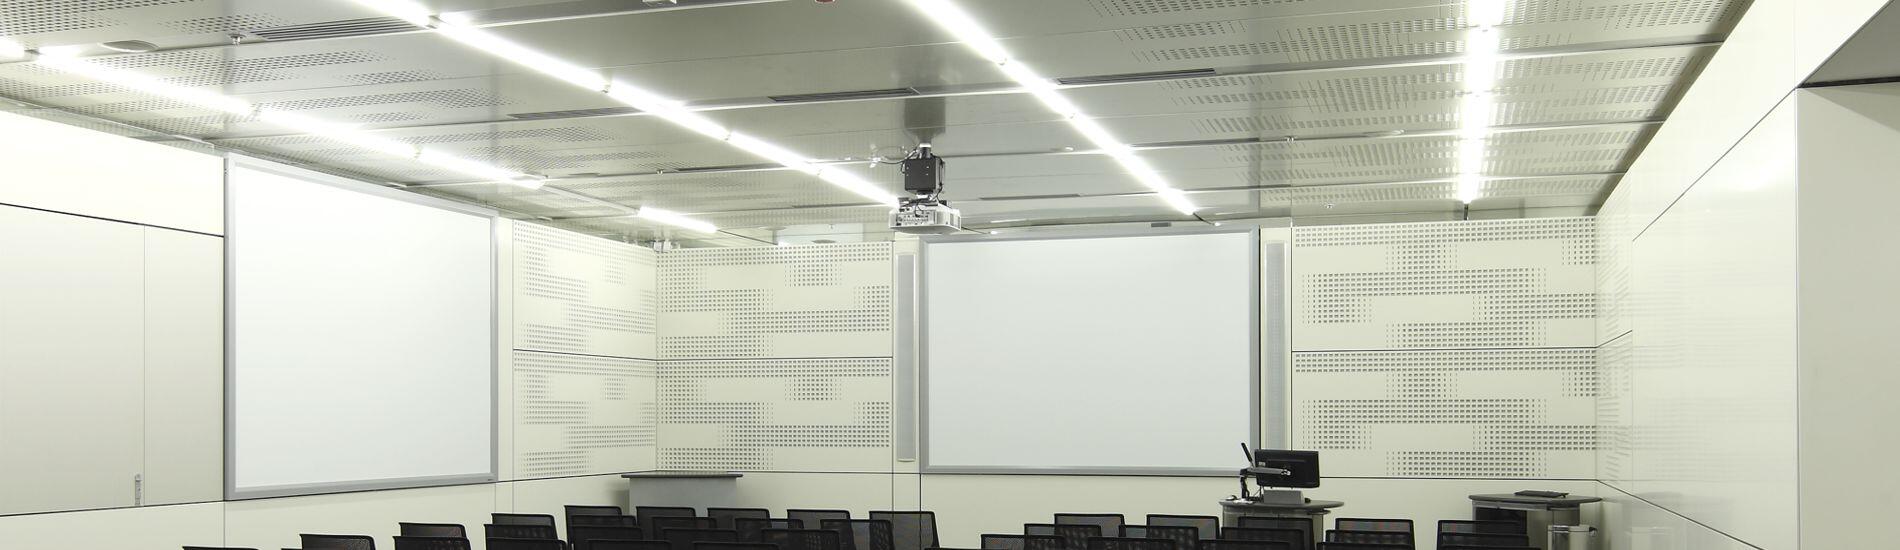 SUPACOUSTIC custom perforated acoustic wall and ceiling panels for teaching facility